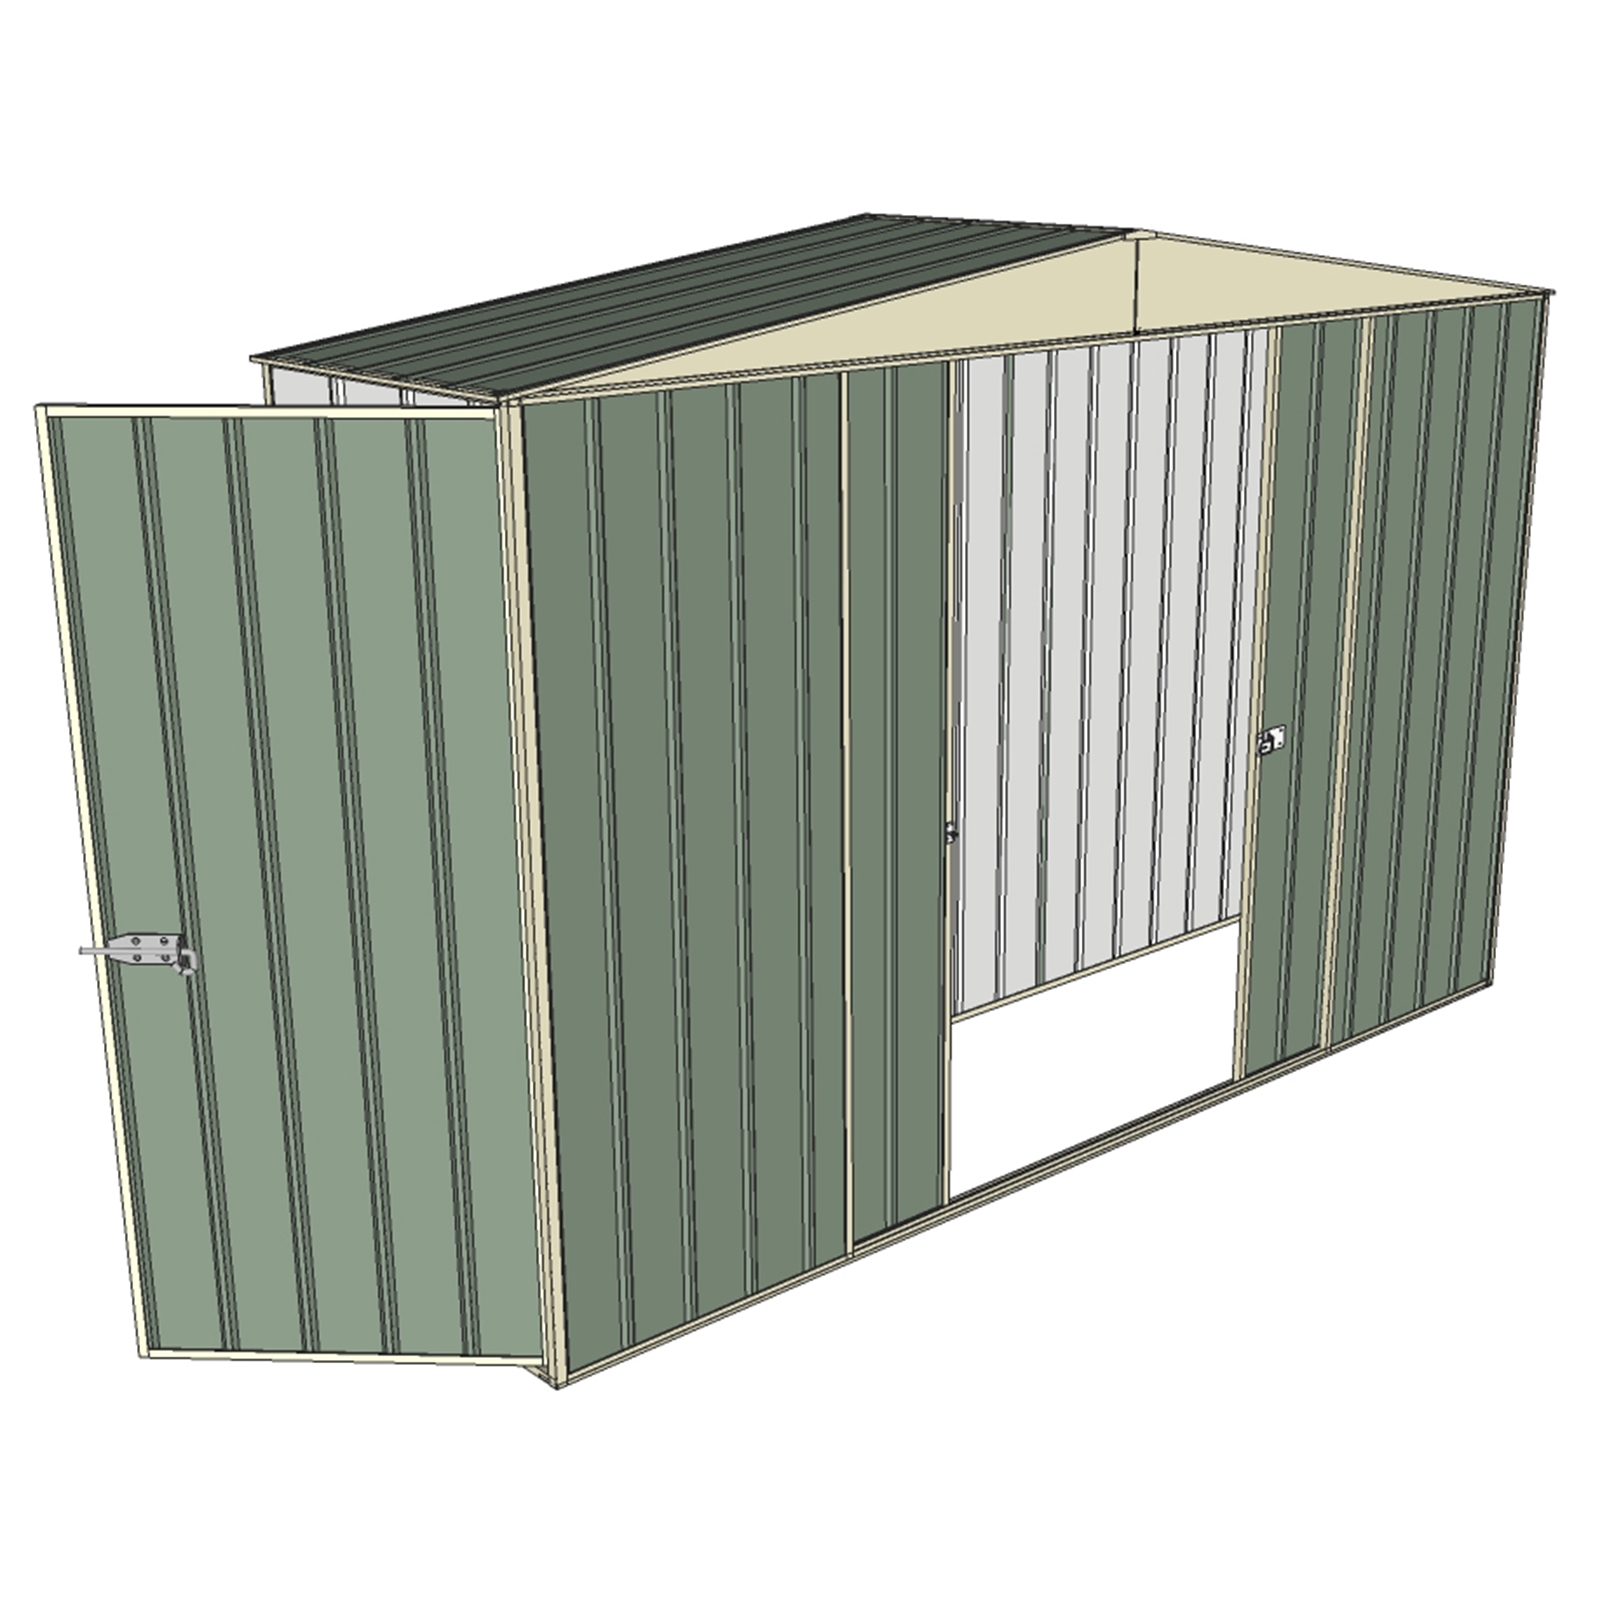 Build-a-Shed 3.0 x 2.3 x 0.8m Green Double Sliding and Single Hinge Door Narrow Shed